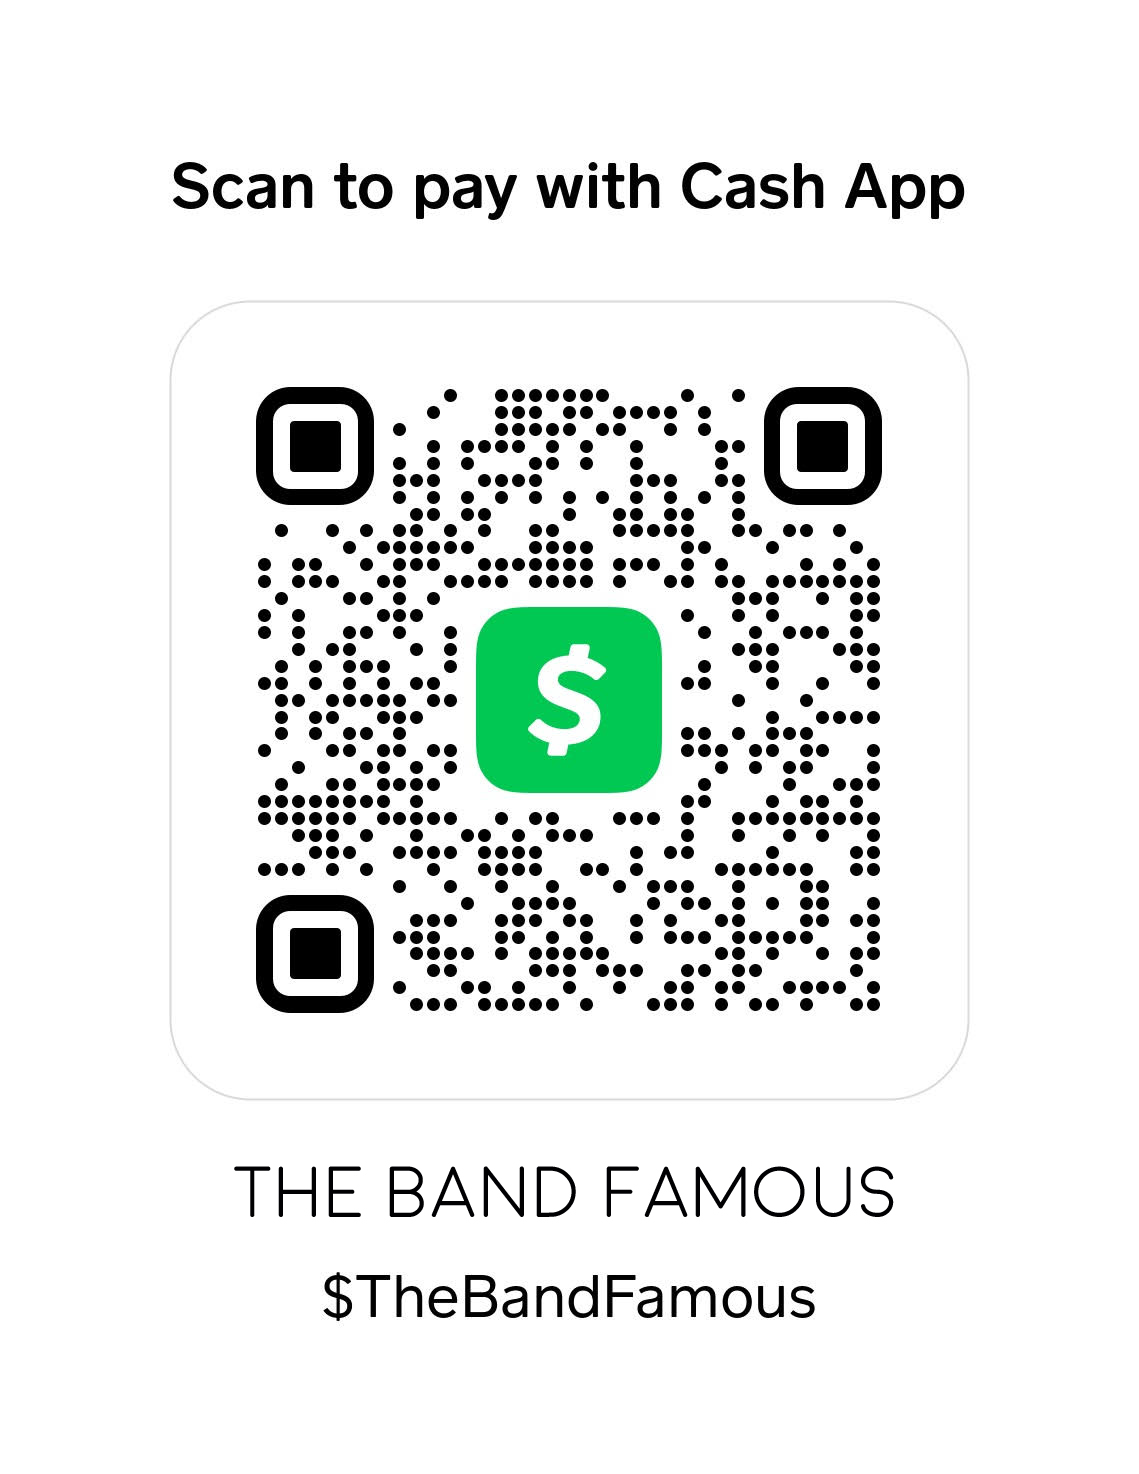 Donate to The Band Famous with Cash App